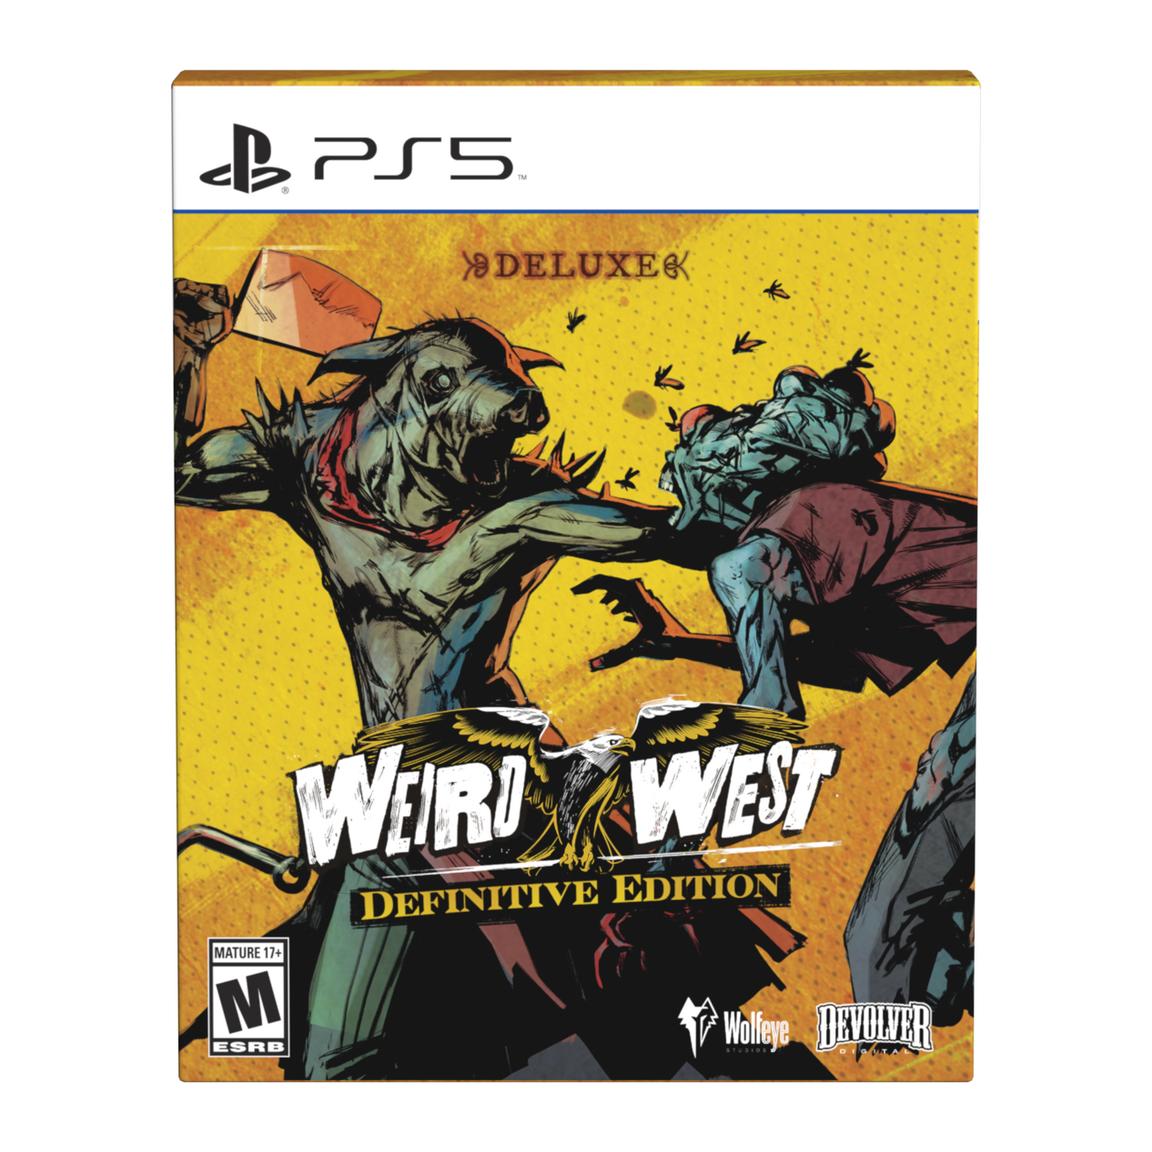 Видеоигра Weird West: Definitive Edition Deluxe - PlayStation 5 dishonored definitive edition ps4 рус суб